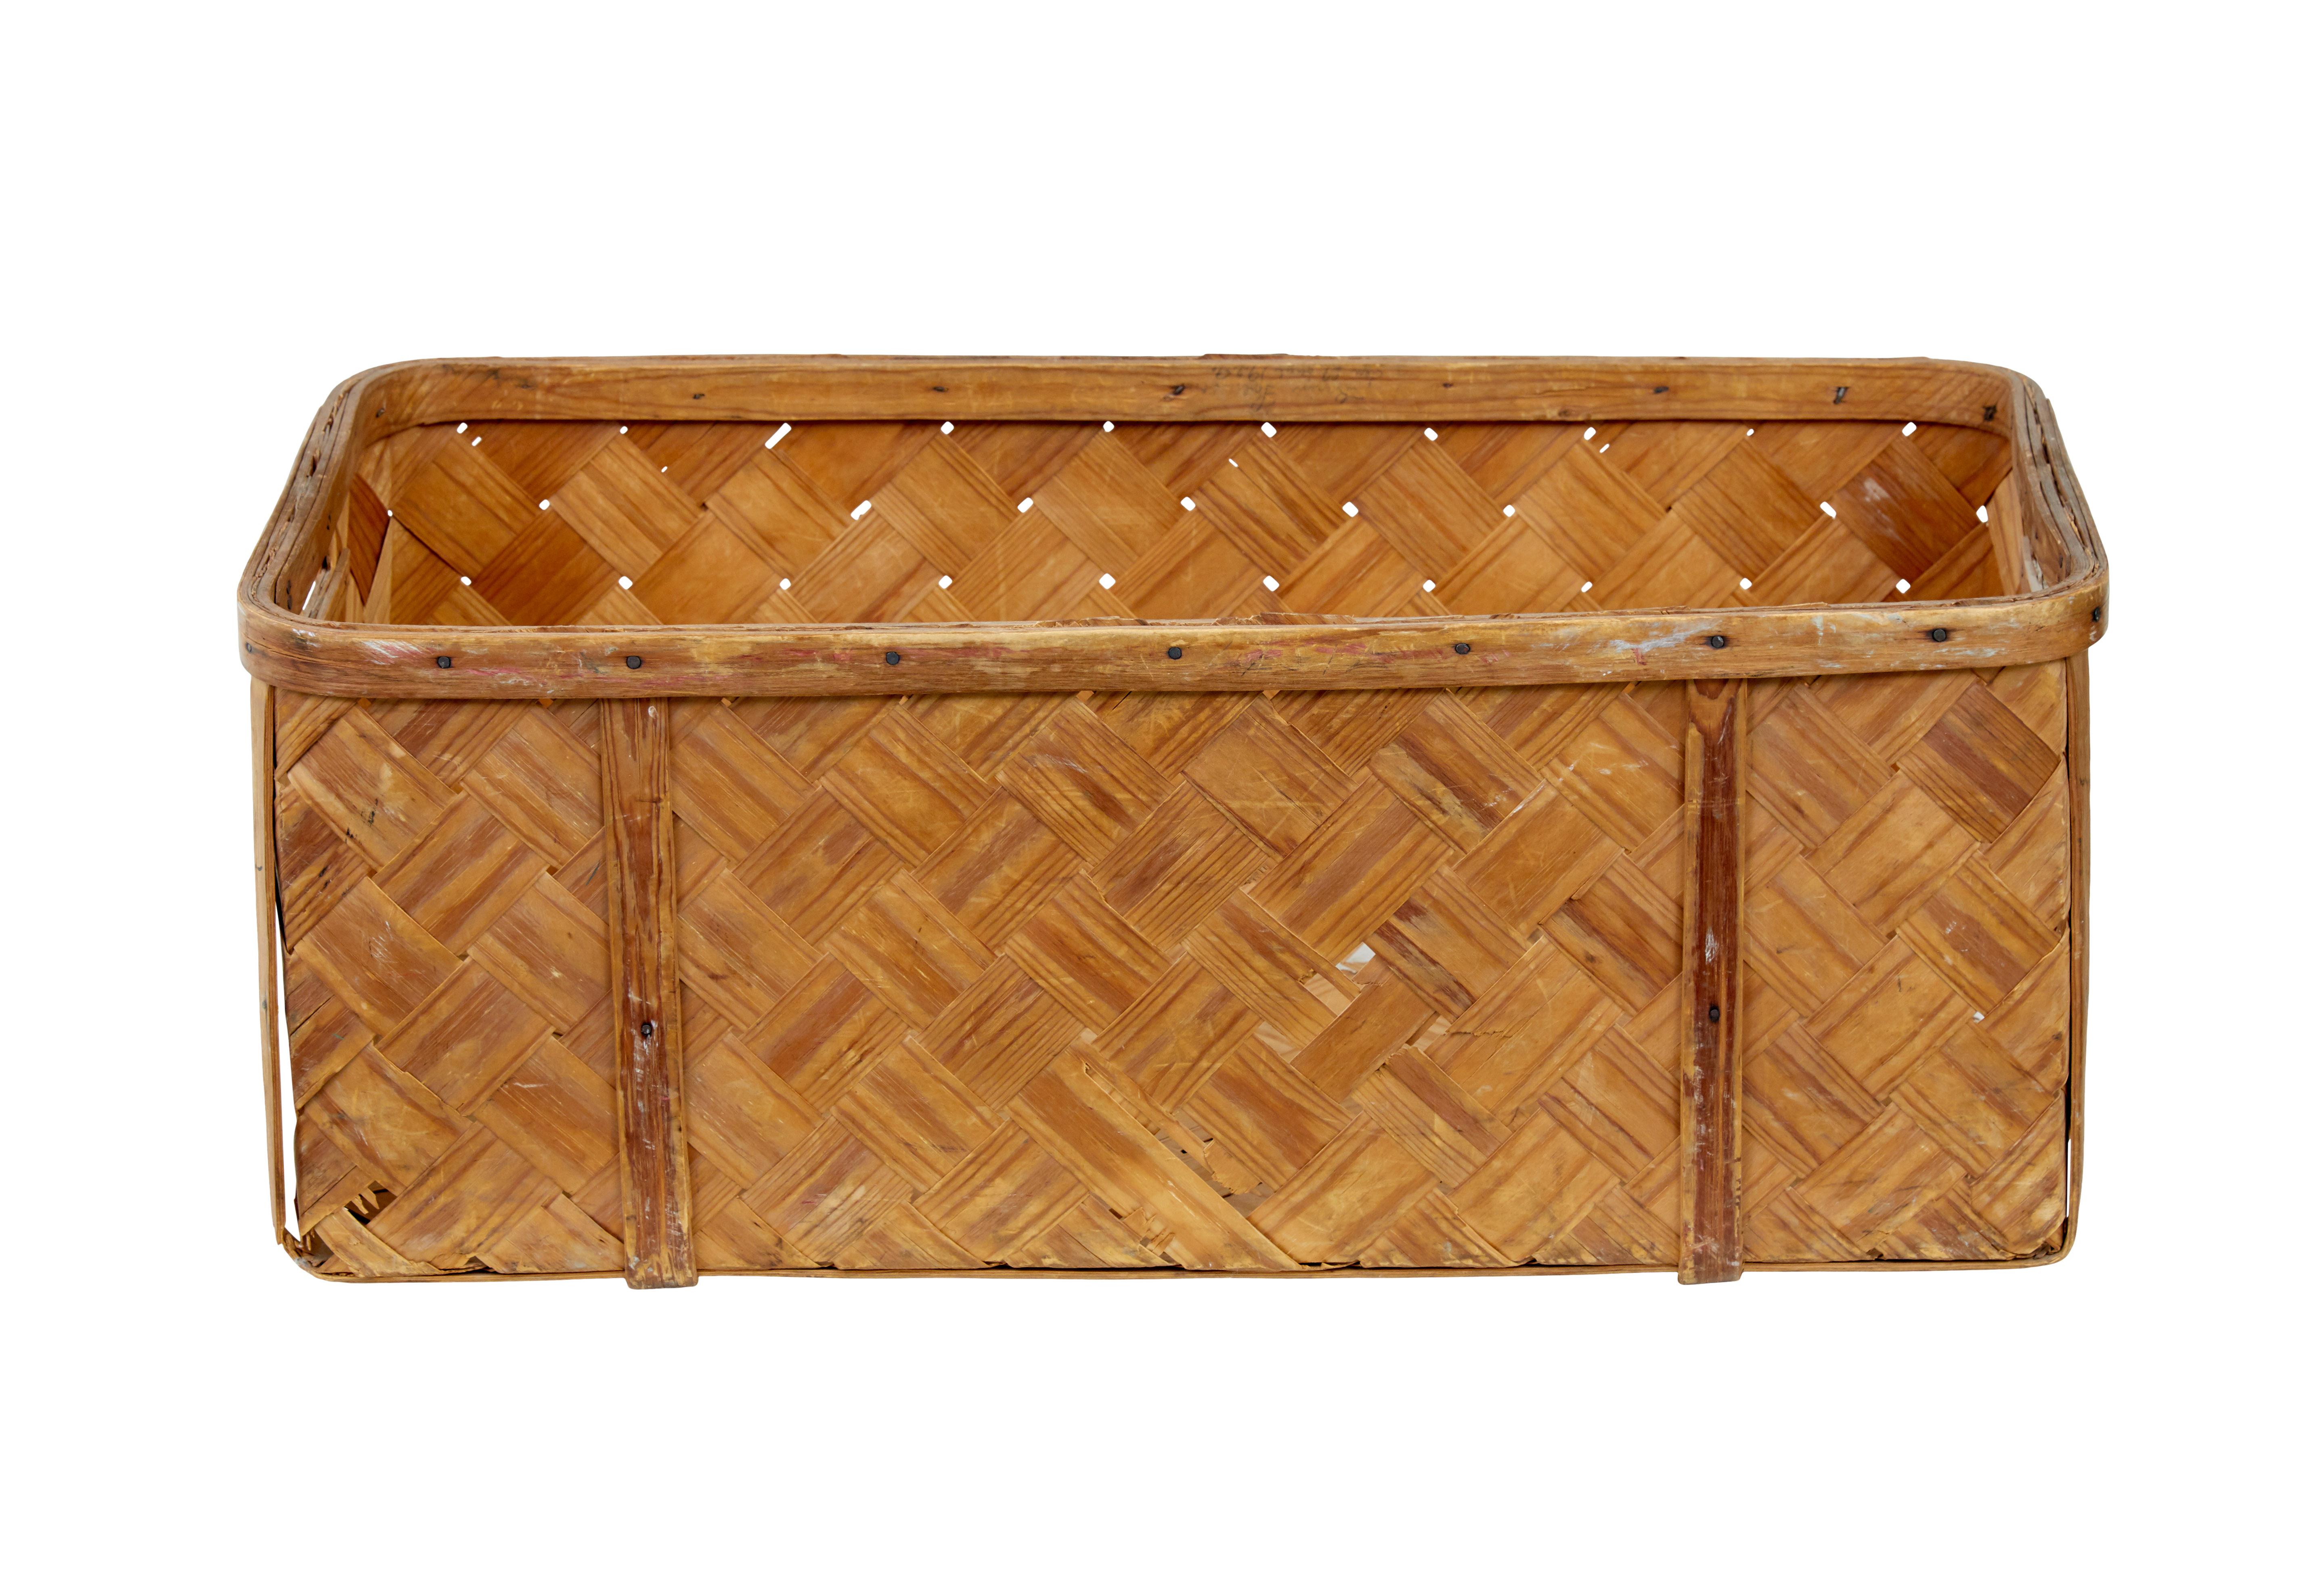 Rustic Swedish rustic 19th century pine woven basket For Sale